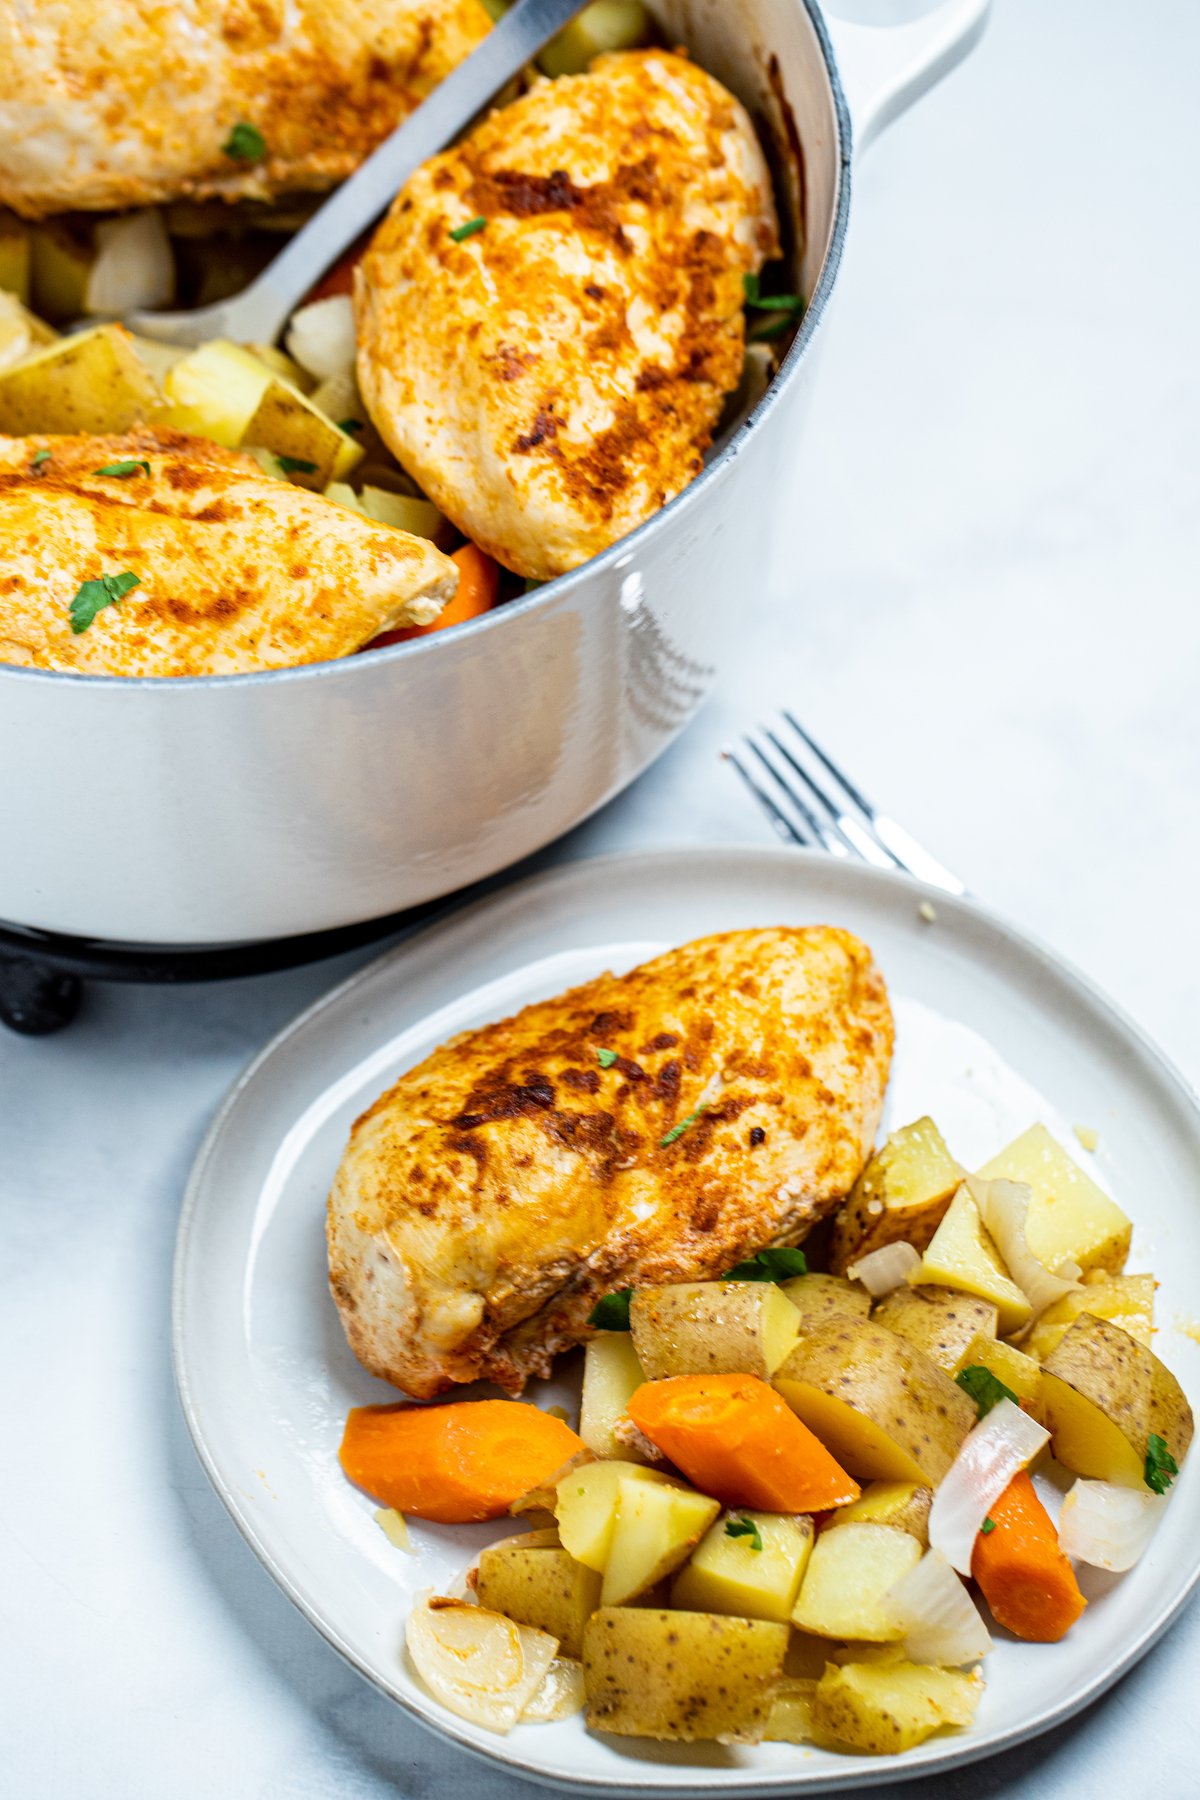 Chicken breast on a plate with potatoes and carrots and onions, in front of a dutch oven.